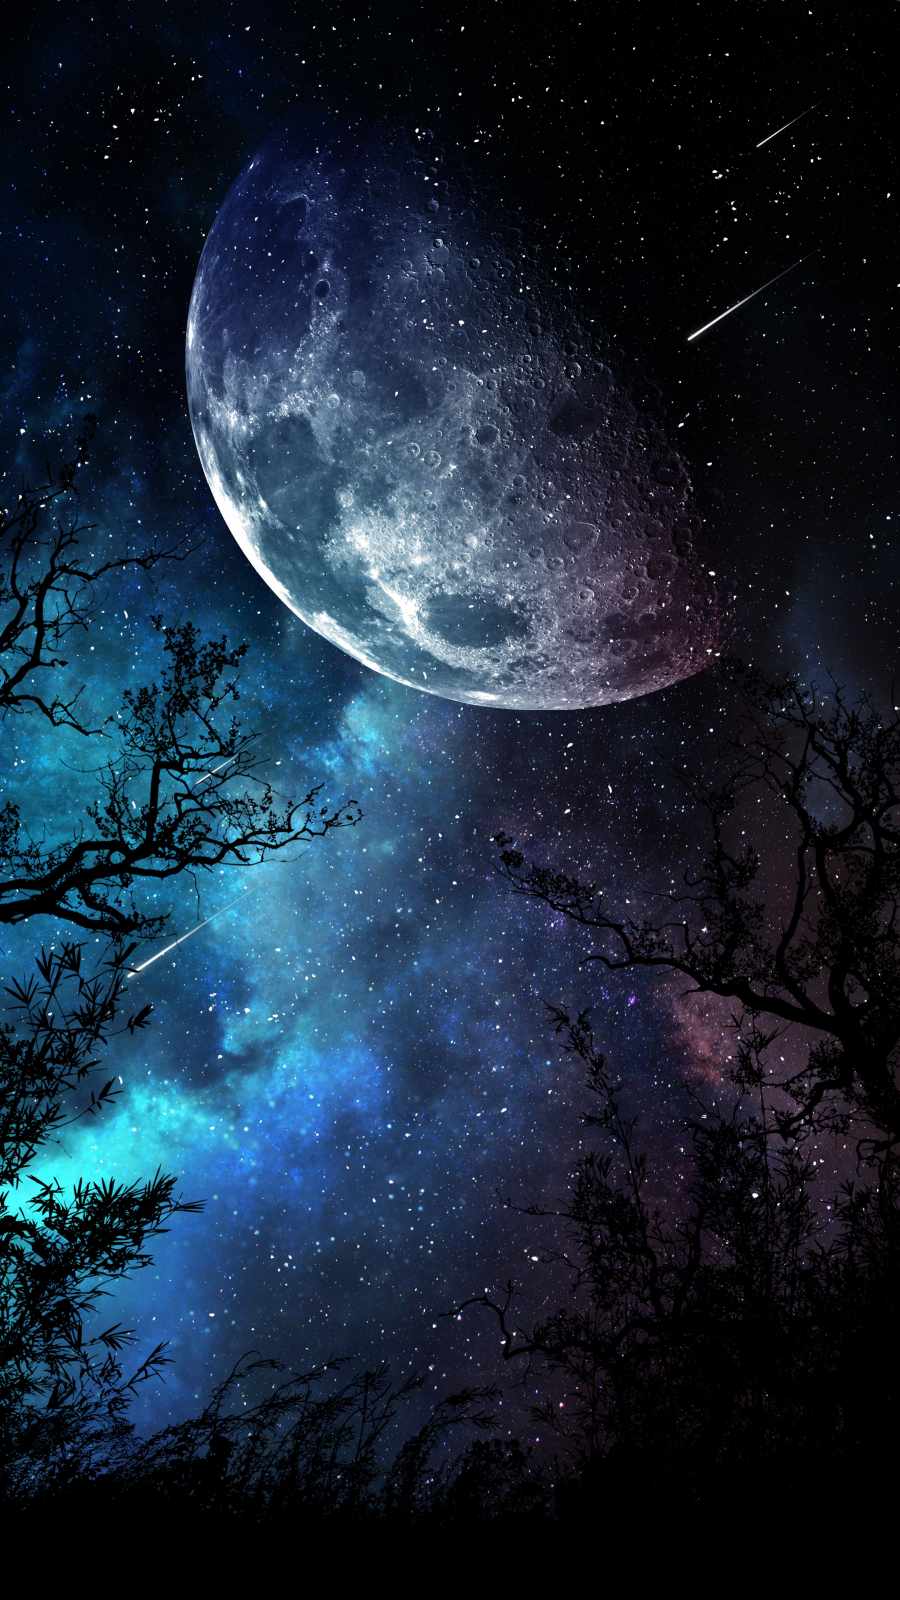 Starry Sky Night Moon - IPhone Wallpapers : iPhone Wallpapers